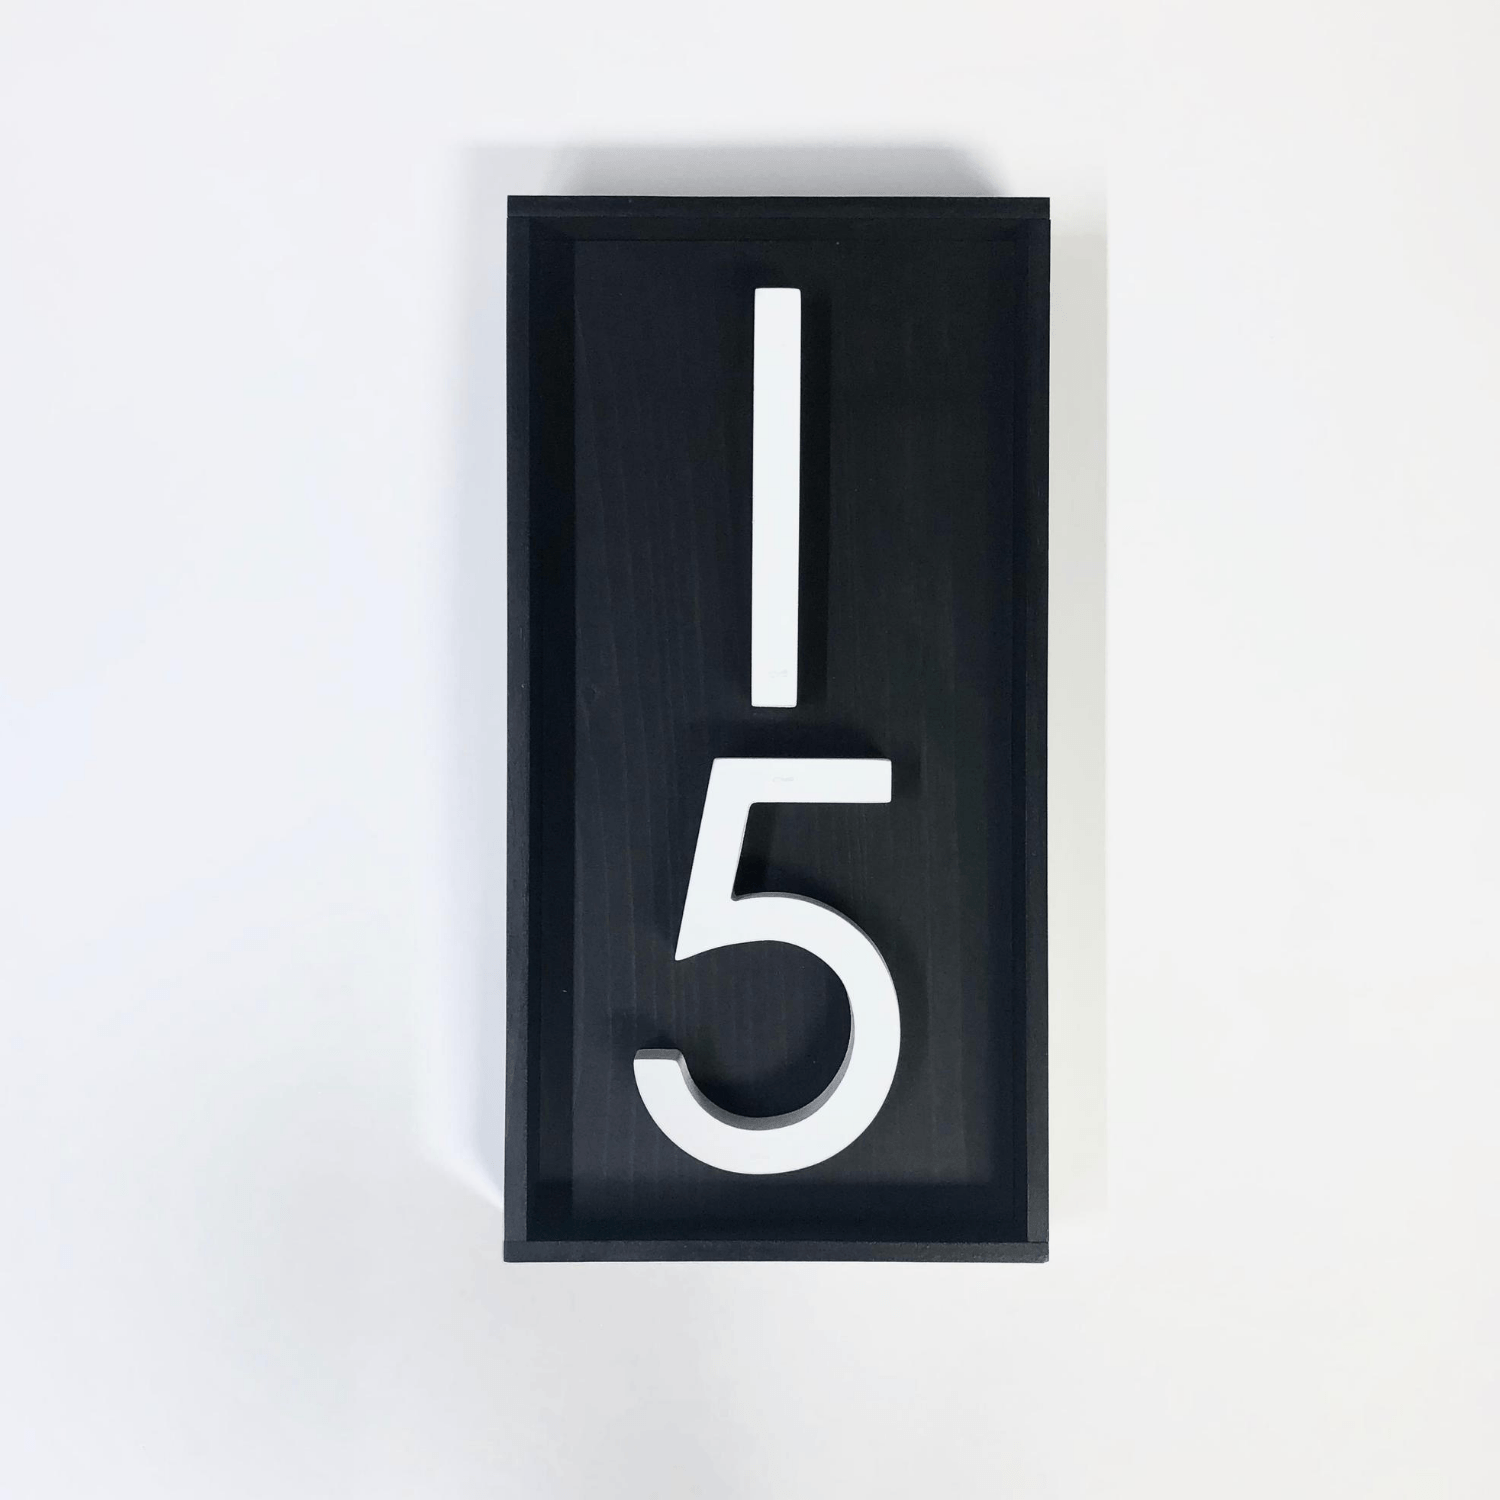 Black address sign with 2 white numbers placed vertically